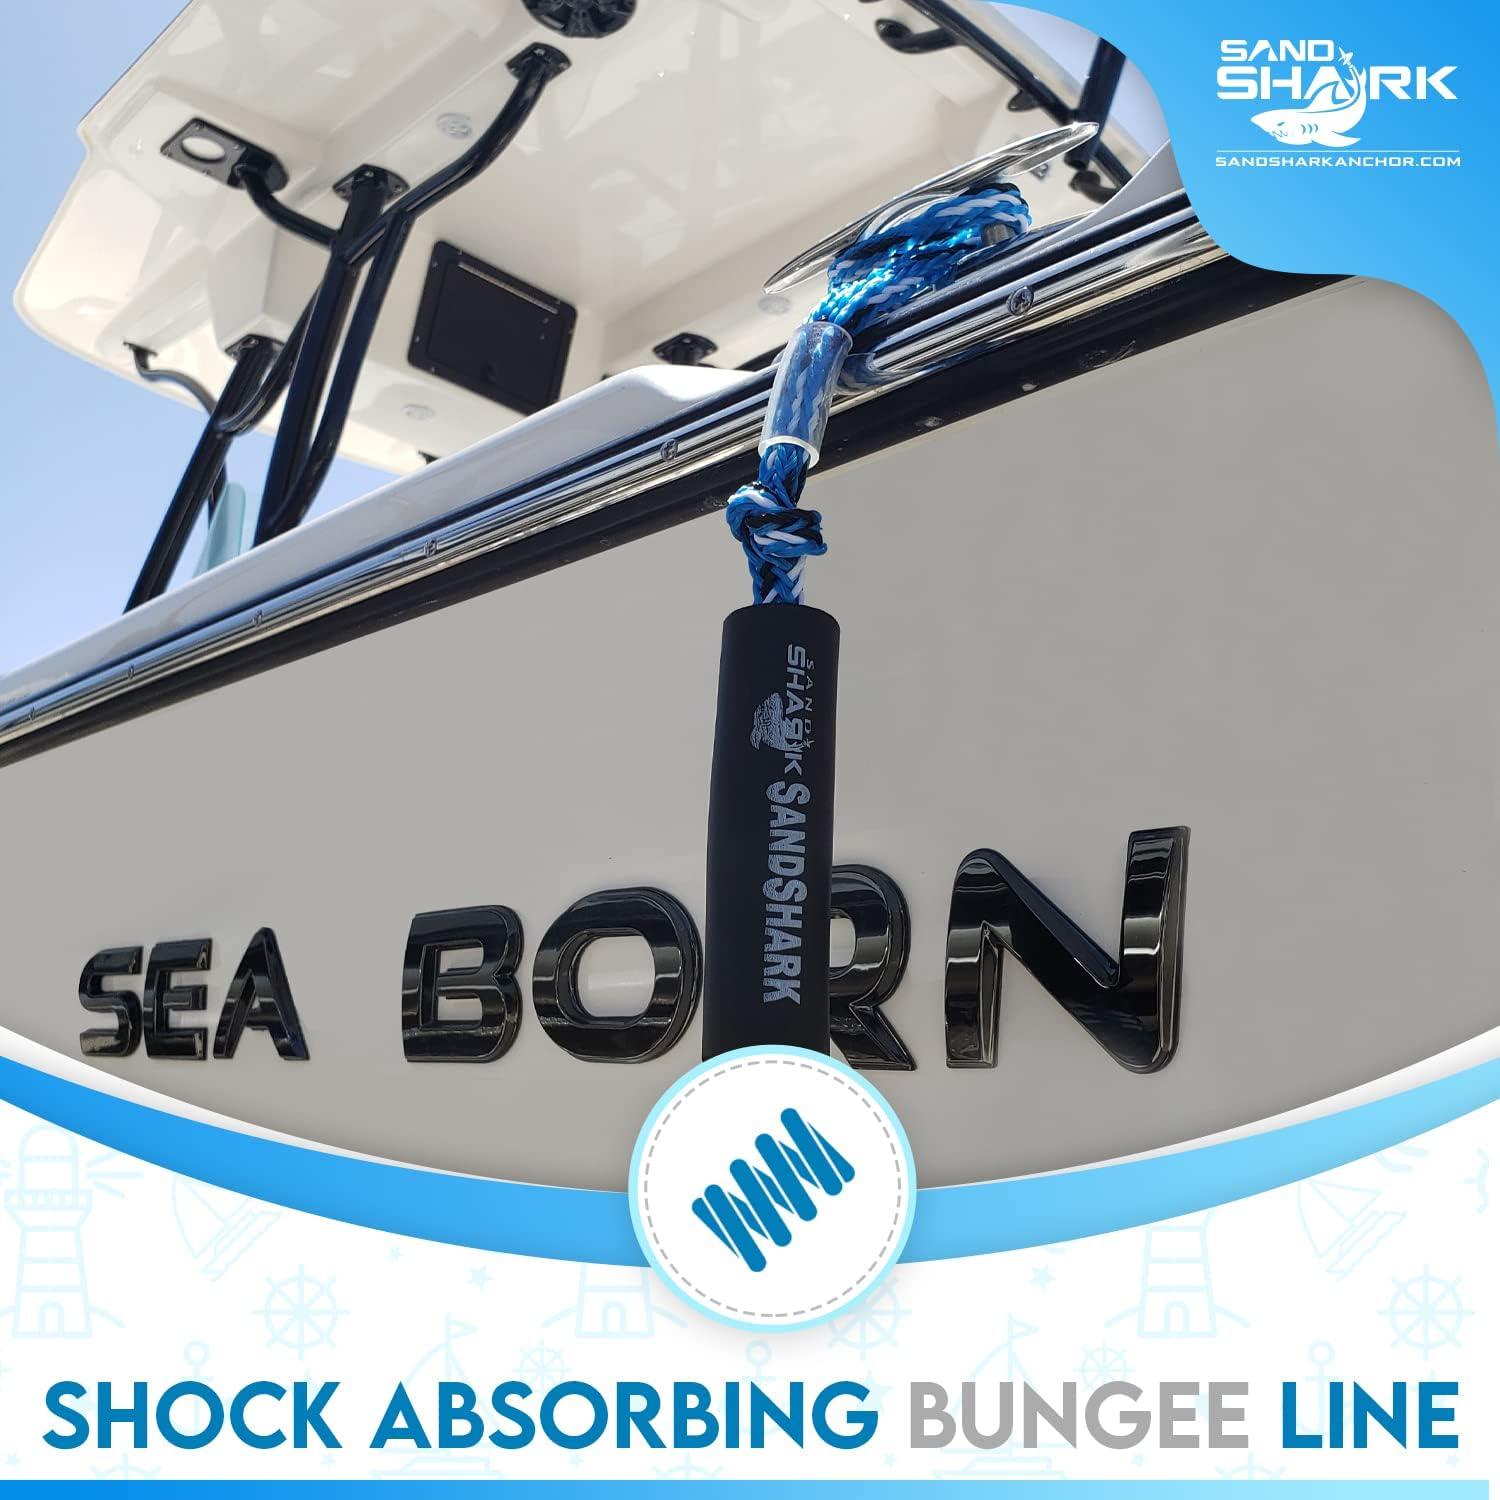 Premium Boat Bungee Dock Lines. Bungee Dock Line Stretches 4-5.5